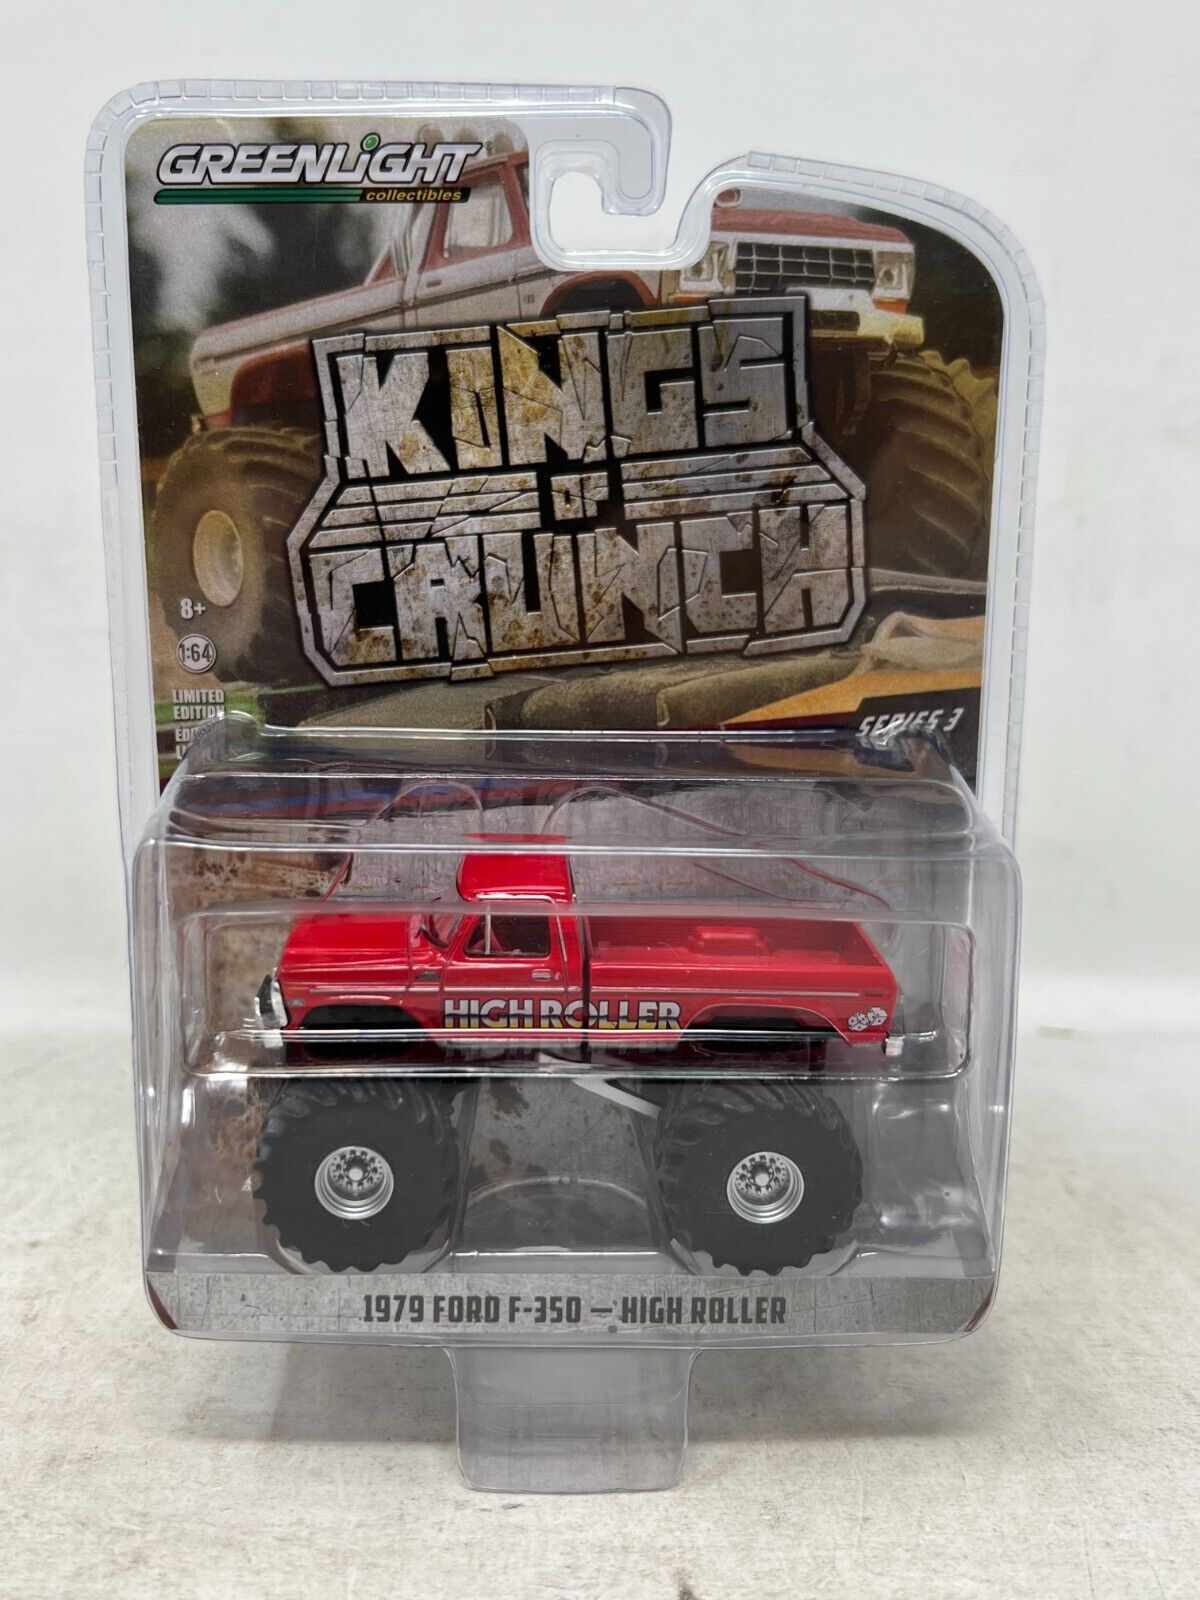 Greenlight Kings of Crunch Series 3 1979 Ford F-350 High Roller 1:64 Diecast